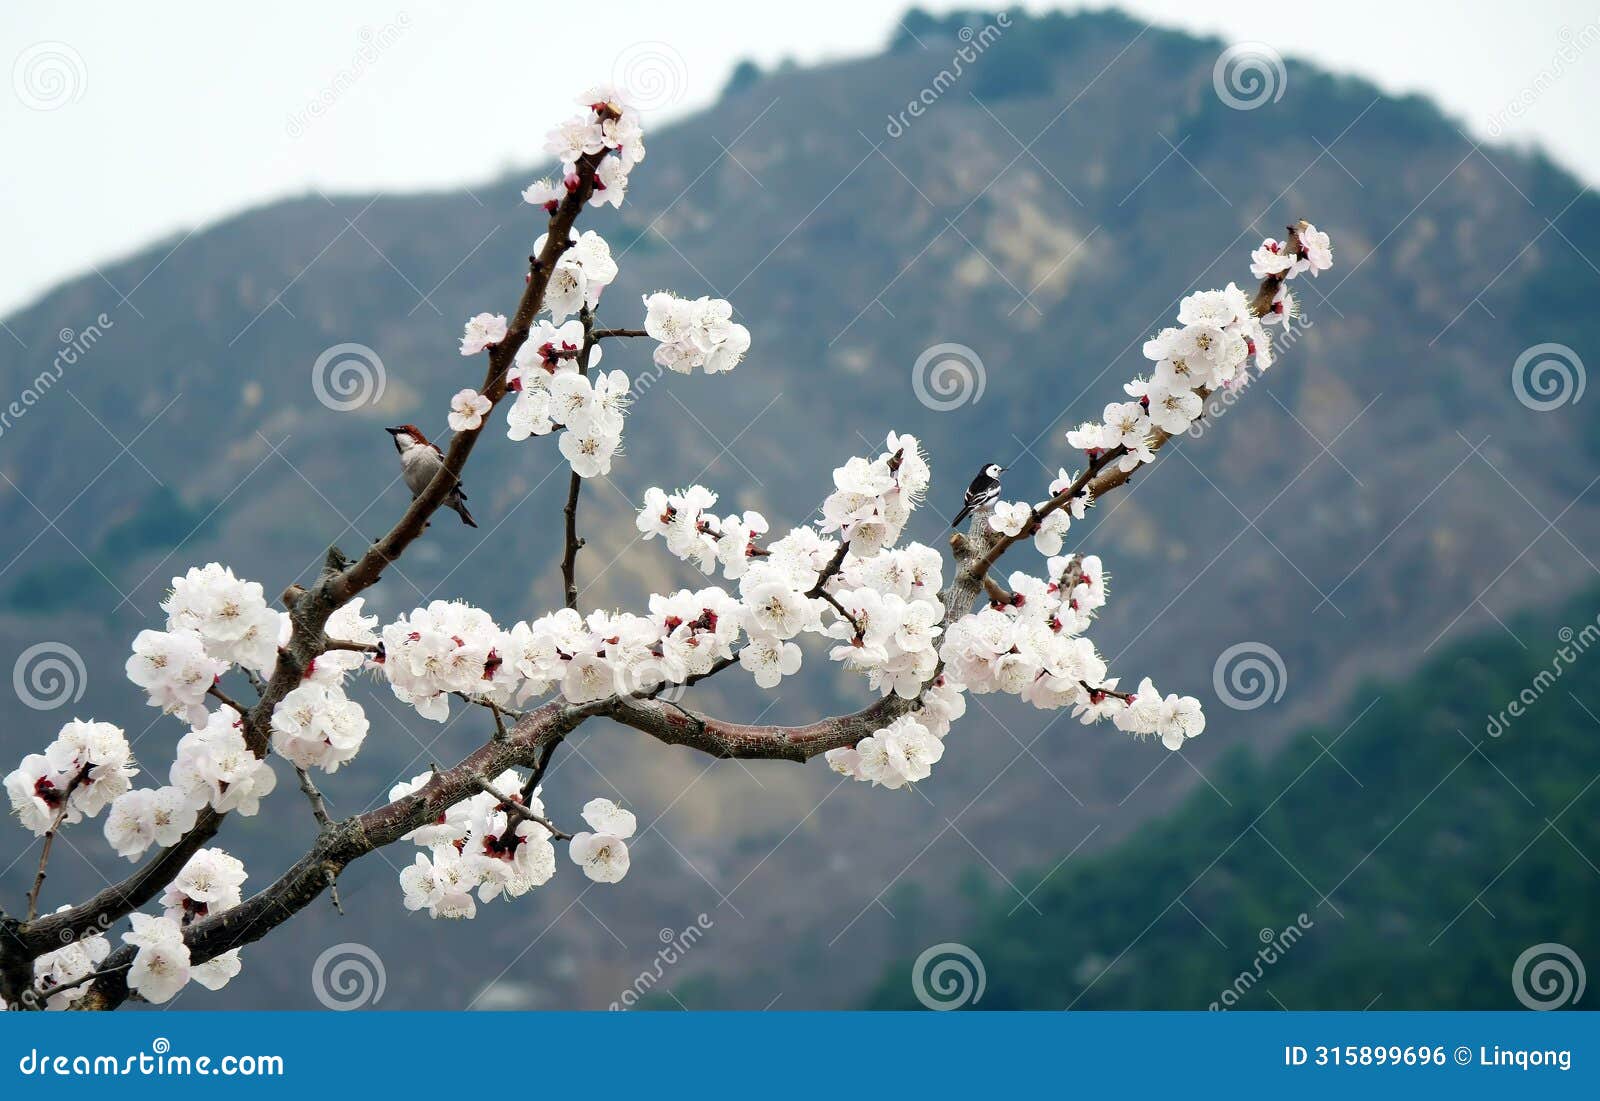 apricot blossoms bloom in the mountains.